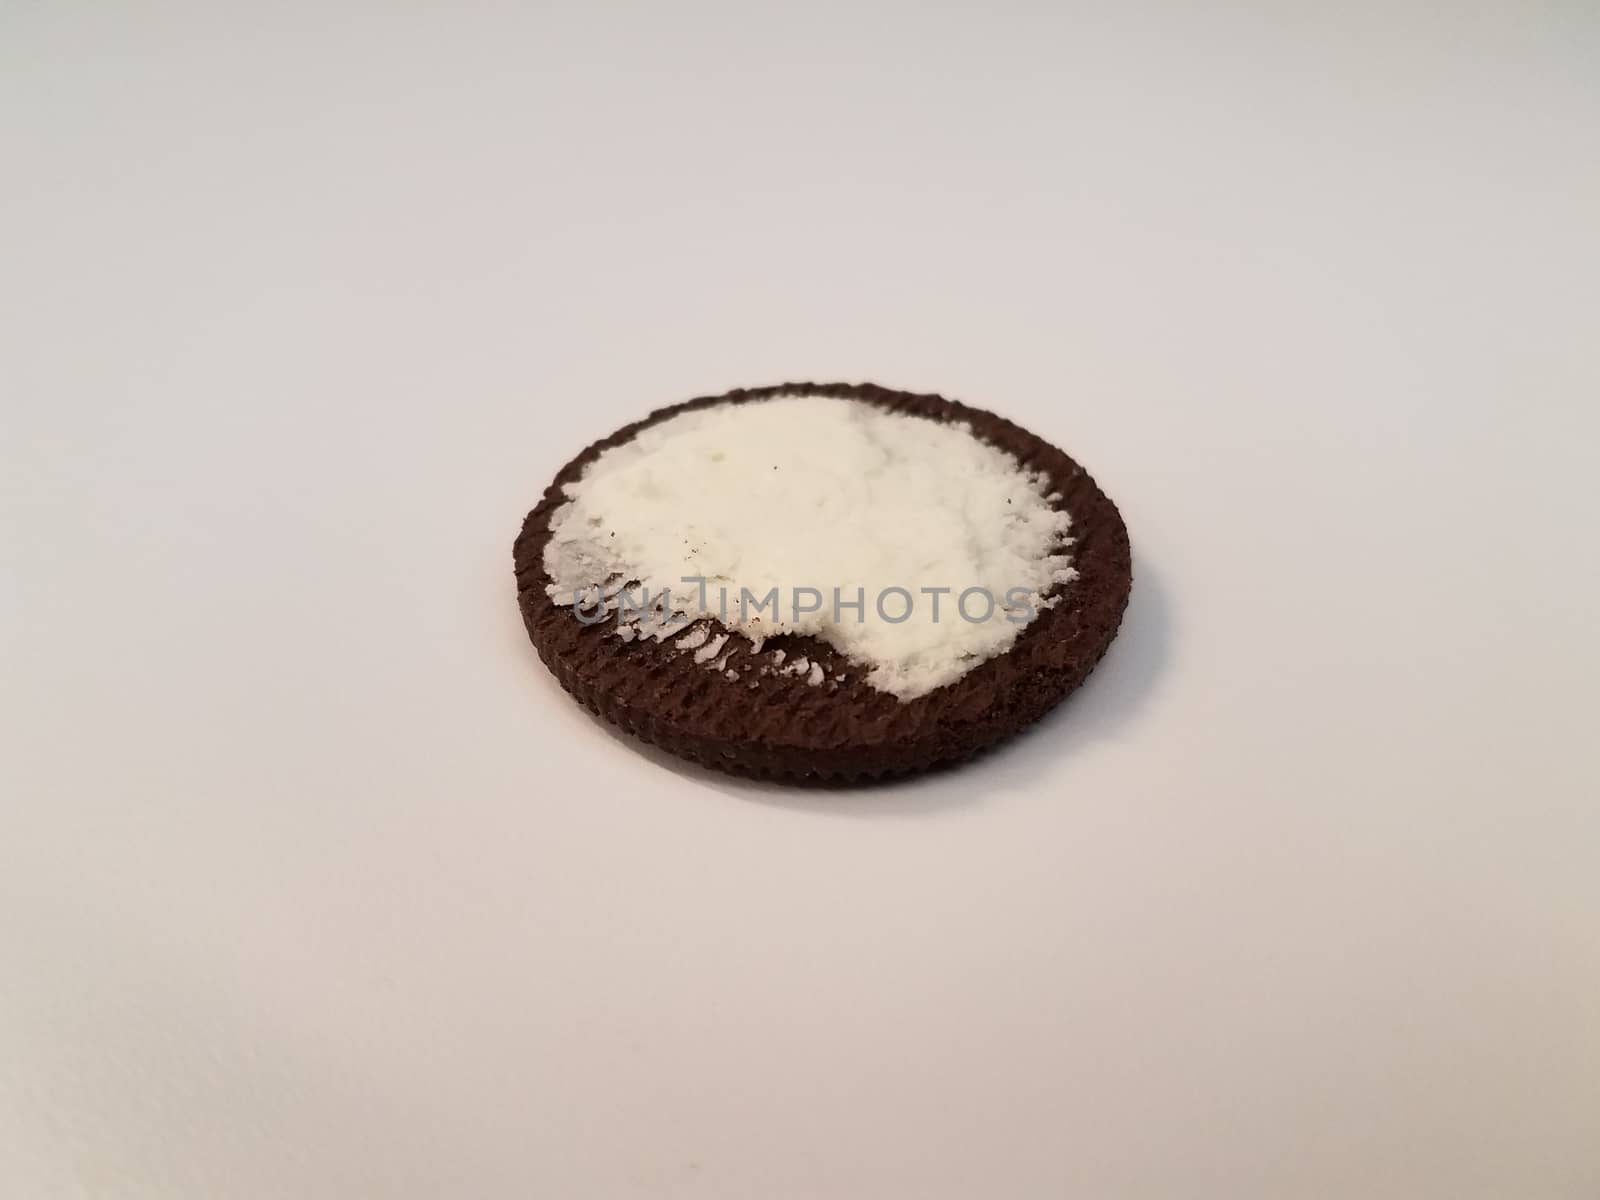 black cookie with white cream filling on white surface or table